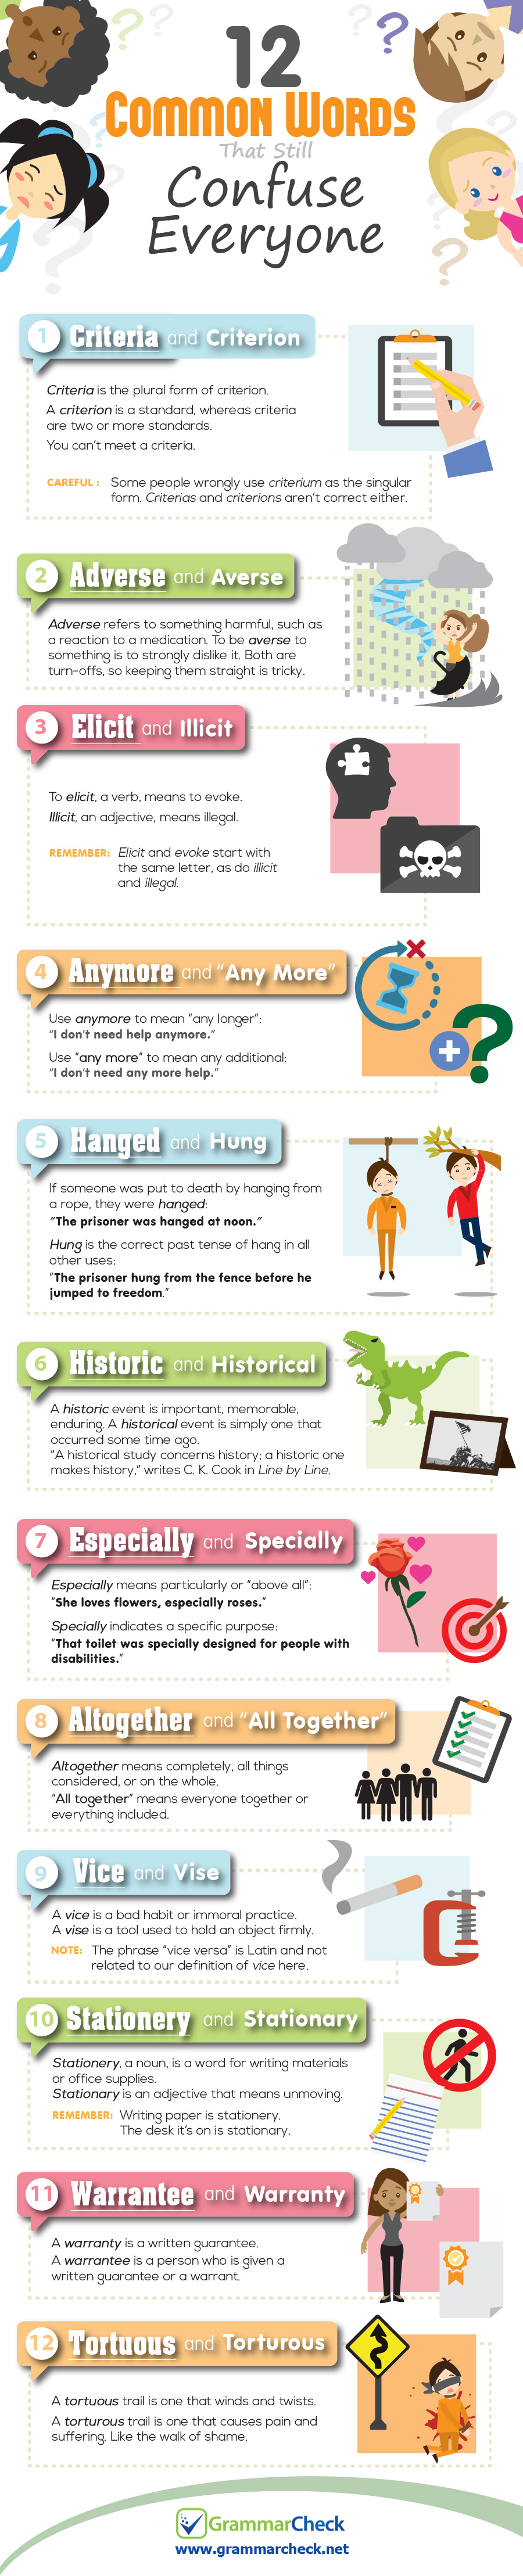 12 Common Words That Still Confuse Everyone (Infographic)